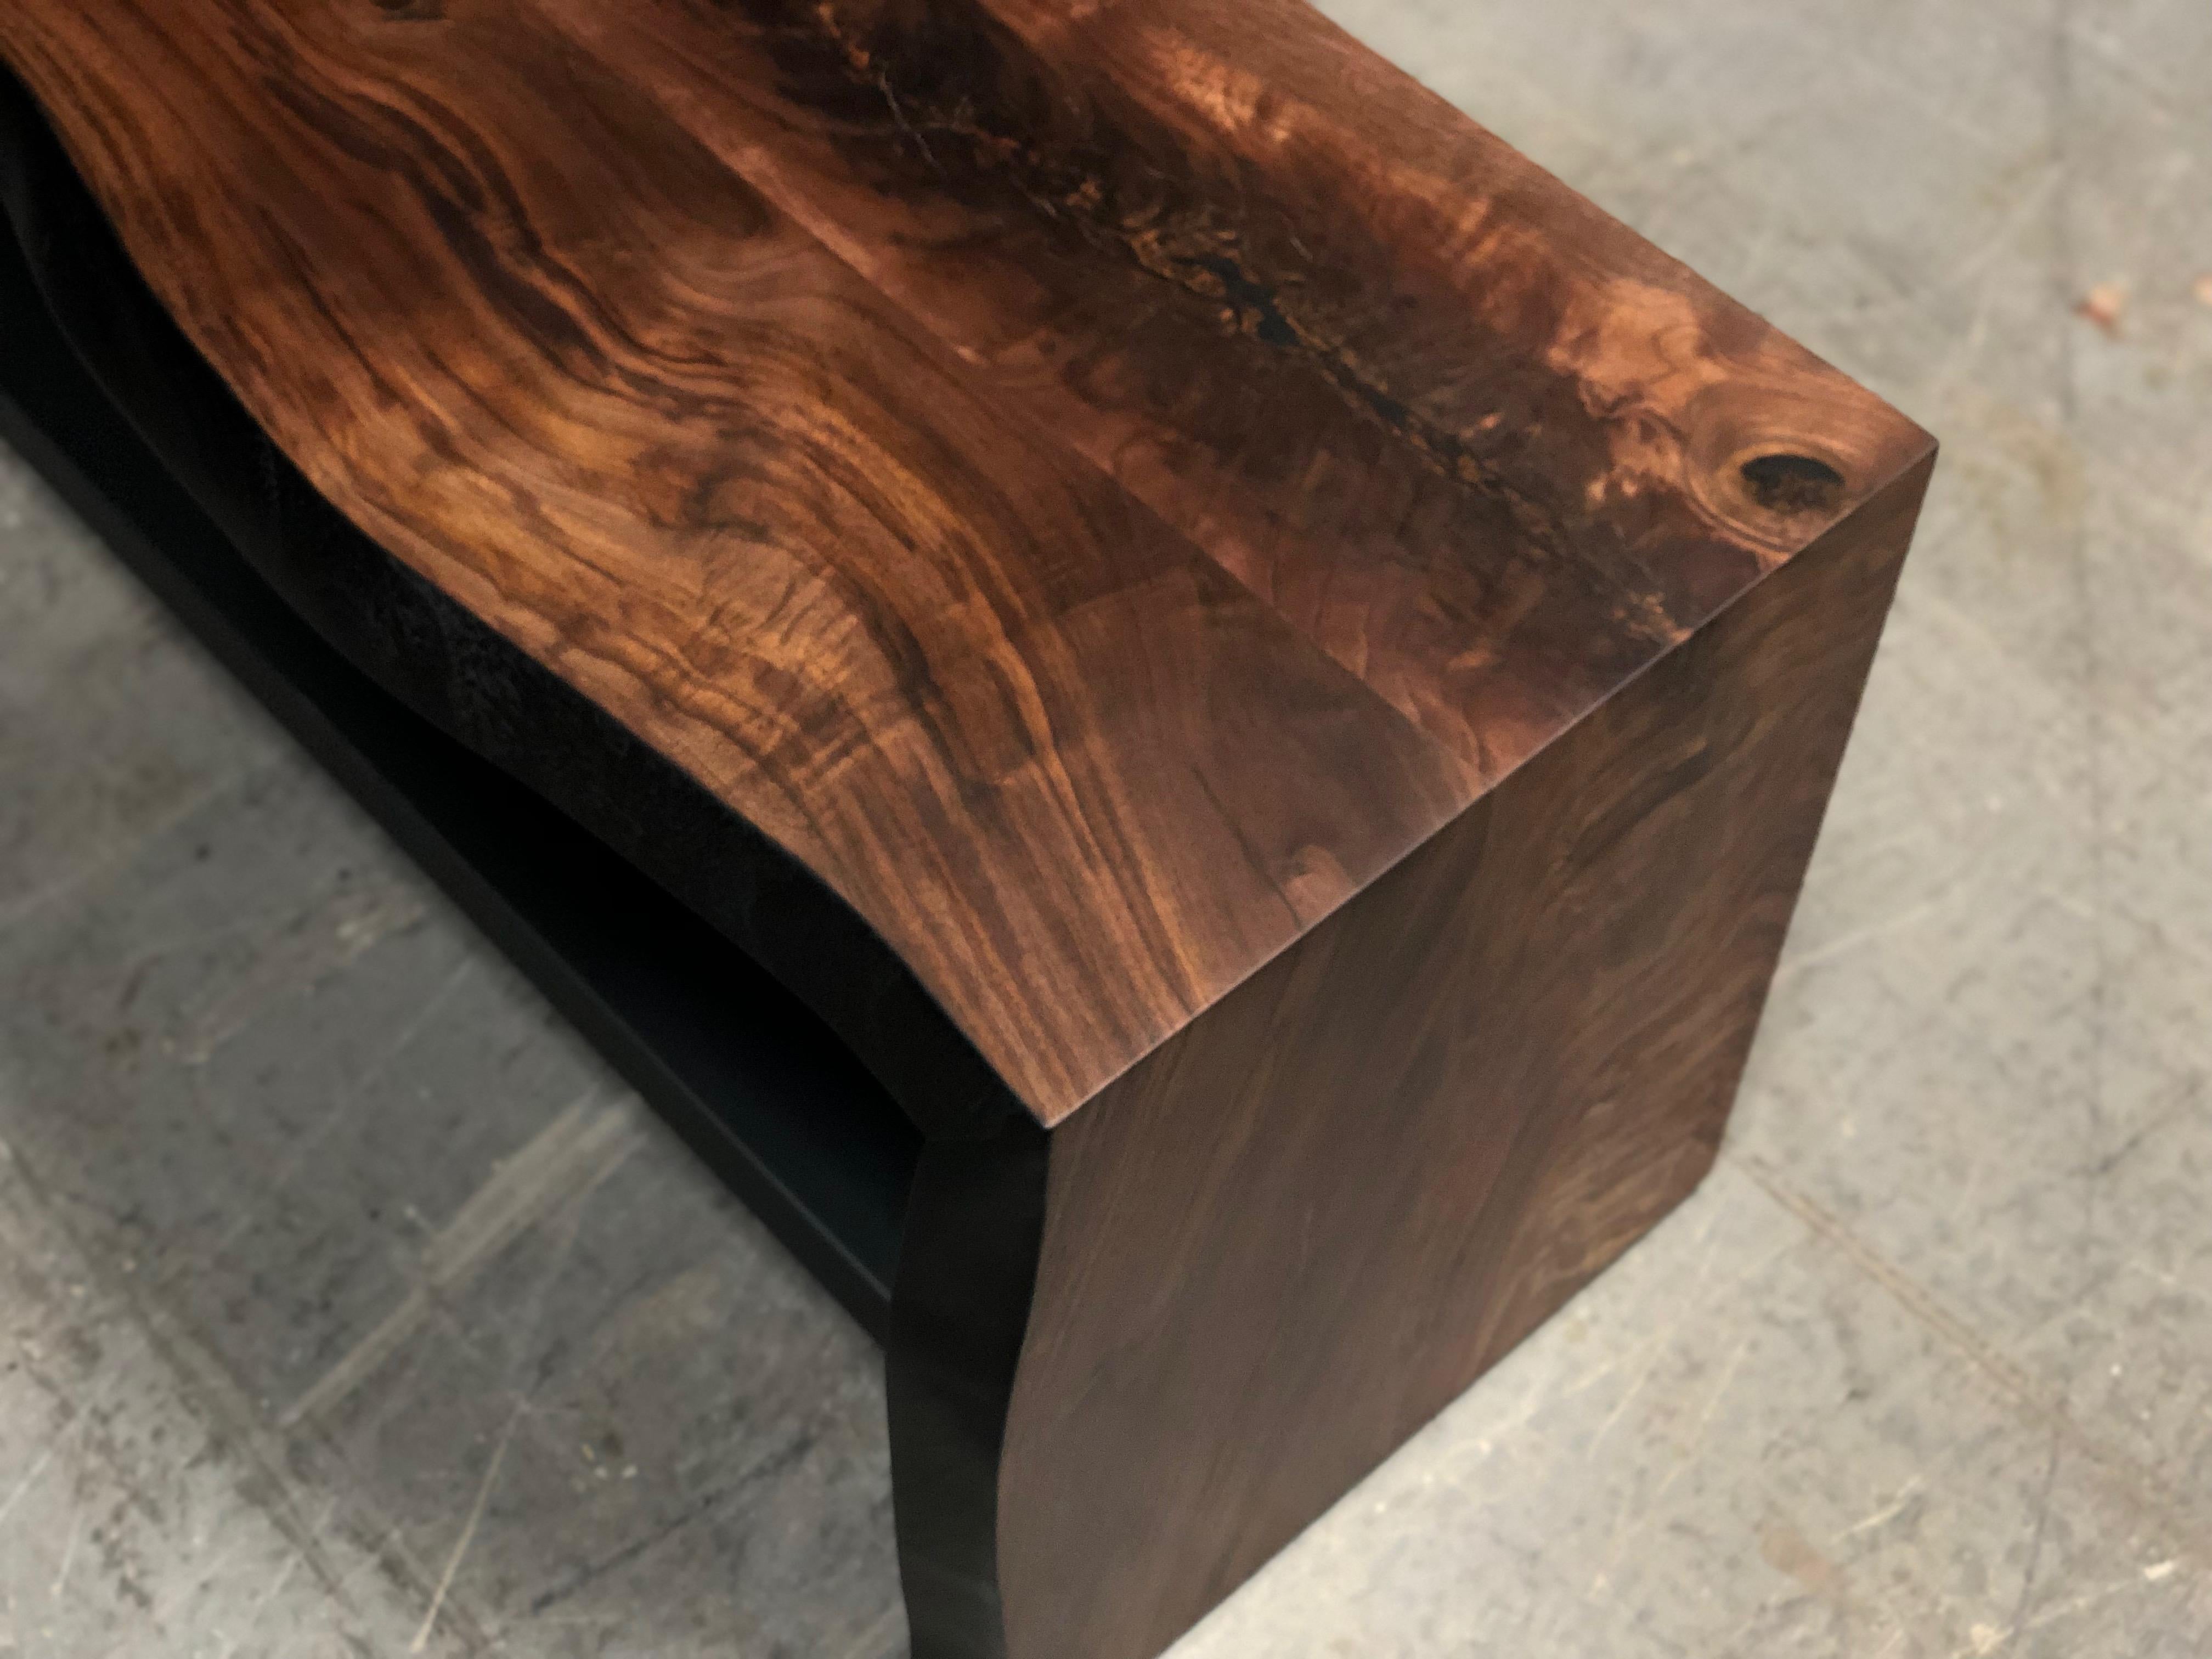 Our 5 ft live edge entryway/ porches waterfall wood bench is handmade to order from hand selected high figured Ambrosia maple slab. Our very unique wood oxidation process give a deep smoky color to the Ambrosia Maple. It has an hand rubbed natural